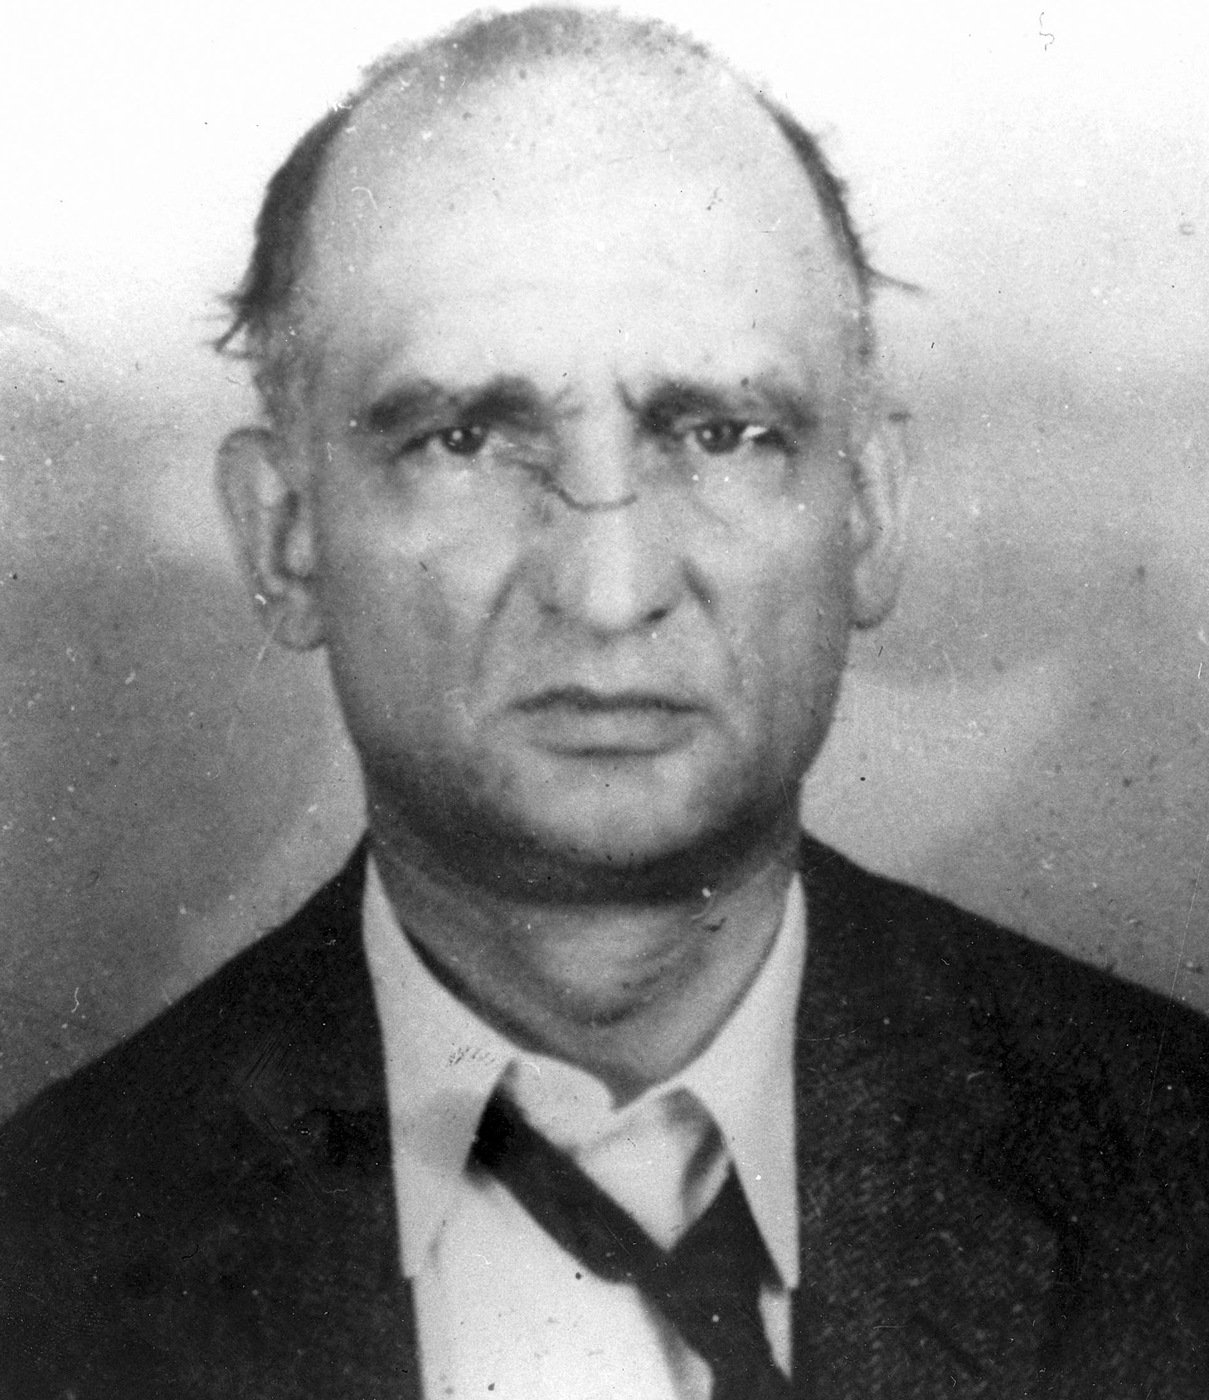 Russian spy Colonel Rudolf Abel, who was convicted of espionage in 1957 in the Hollow Nickel case.